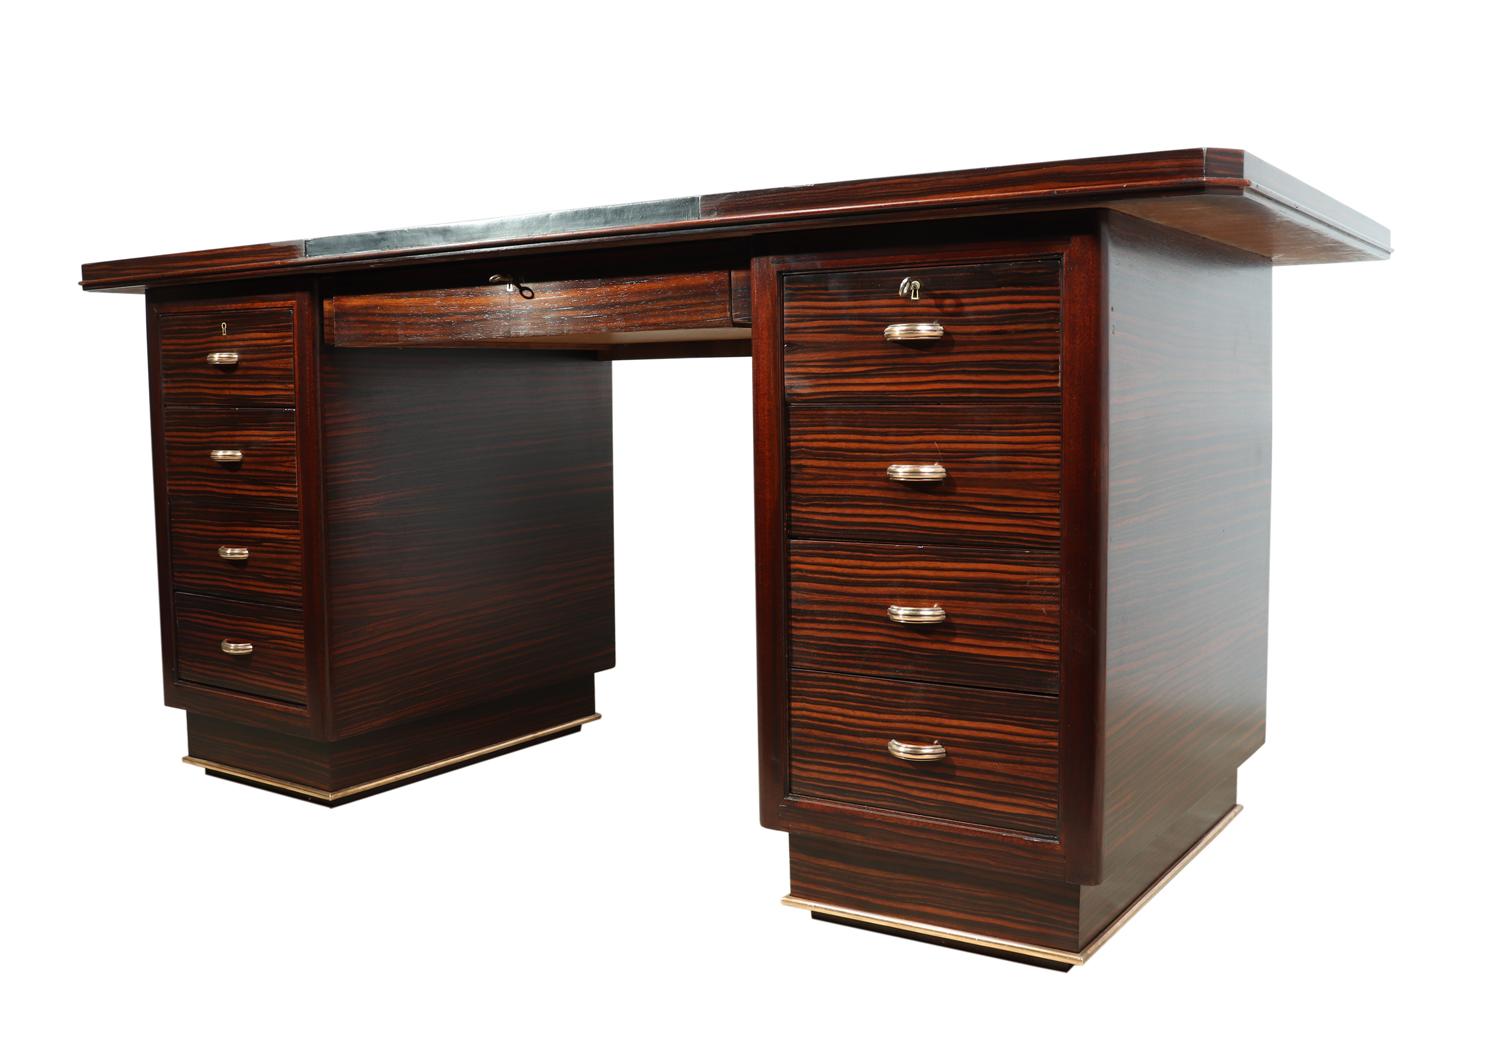 Art Deco desk in Macassar ebony, circa 1930

A good sized Art deco desk produced in Macassar ebony in France in the 1930s, it features 8 drawers brass hard wear and a leather inset top, the desk collapses into 4 pieces for ease of delivery, this